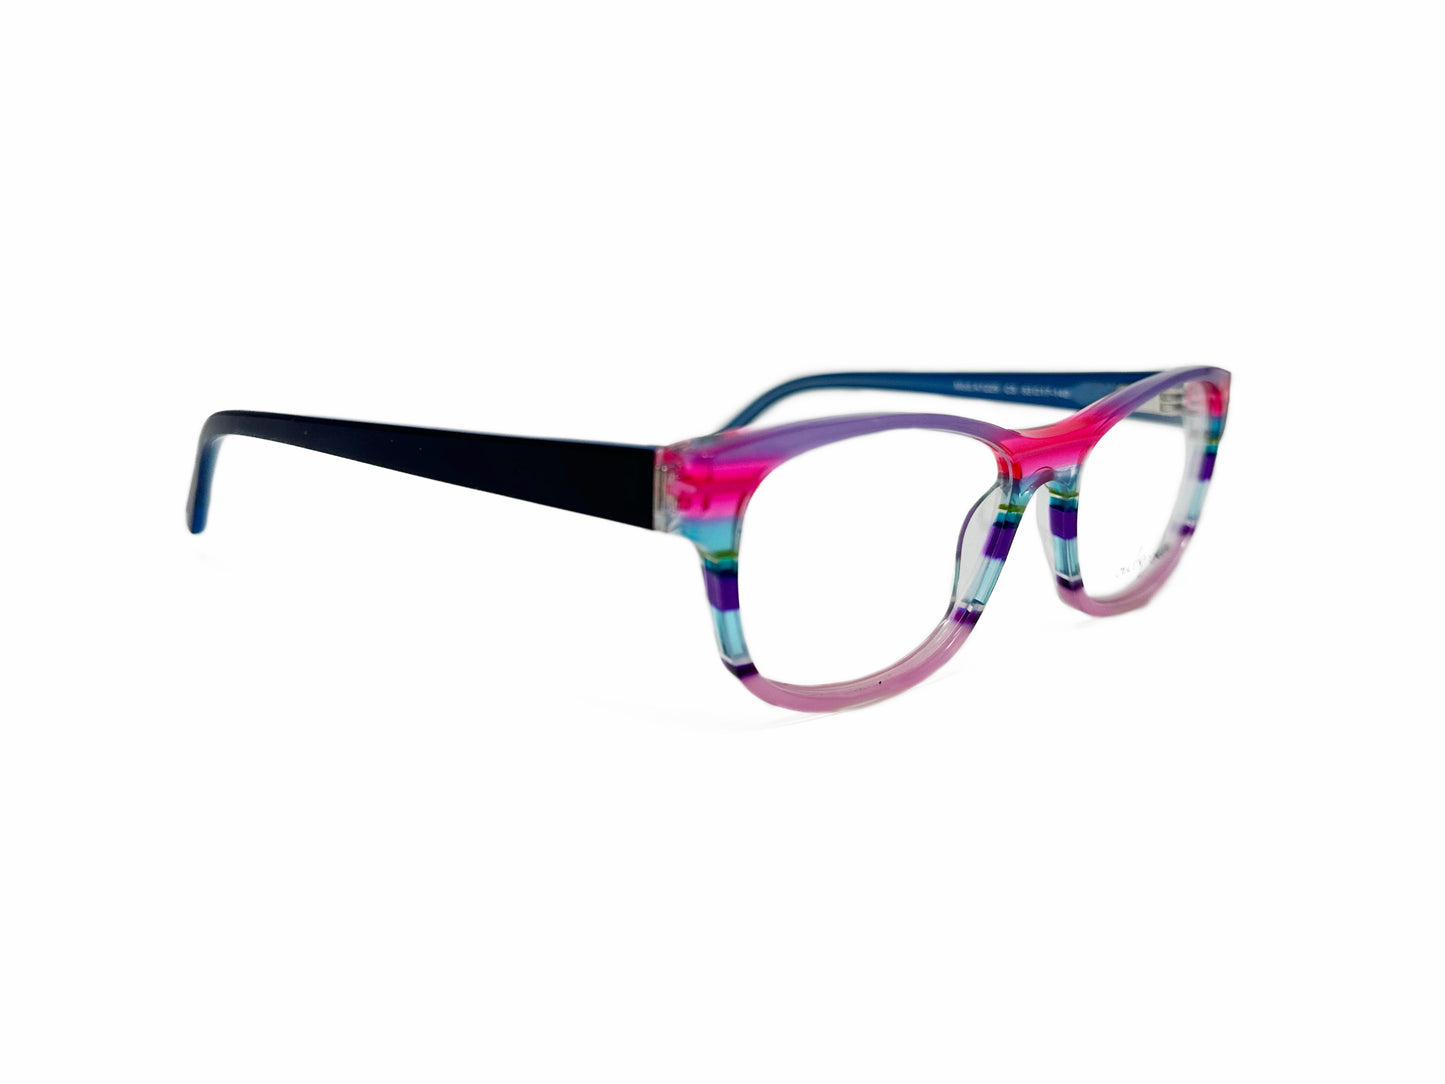 Outspoken rectangular acetate optical frame. Model: A1229. Color: C5 - Purple, pink, blue, and green stripes. Side view.